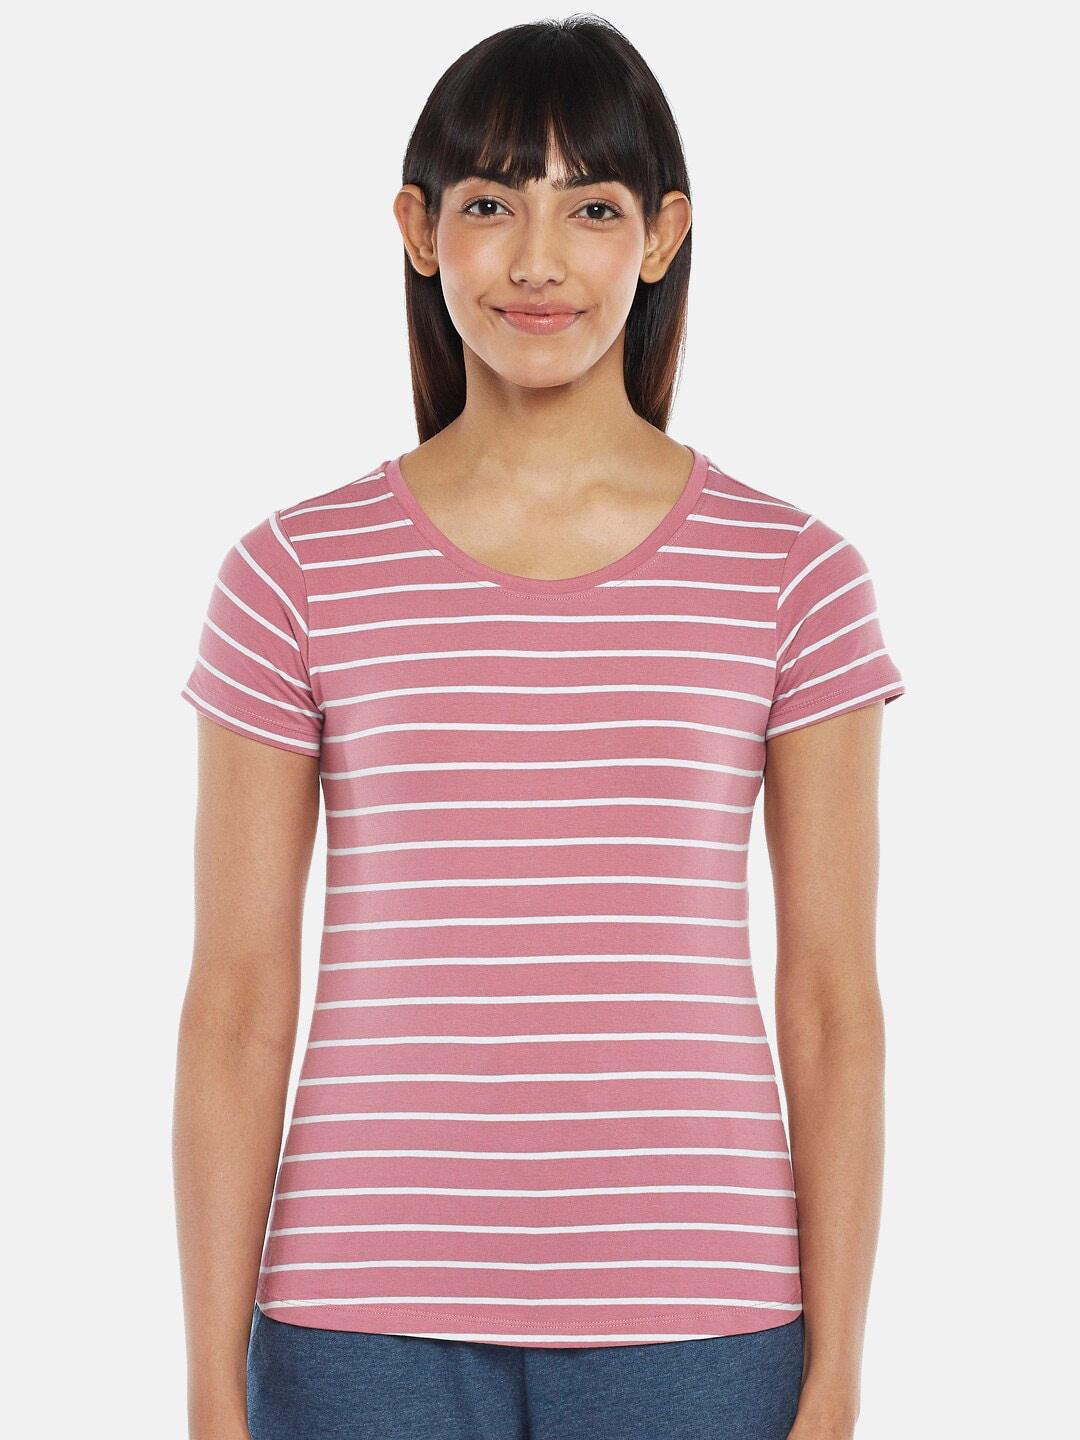 dreamz-by-pantaloons-rose-striped-top